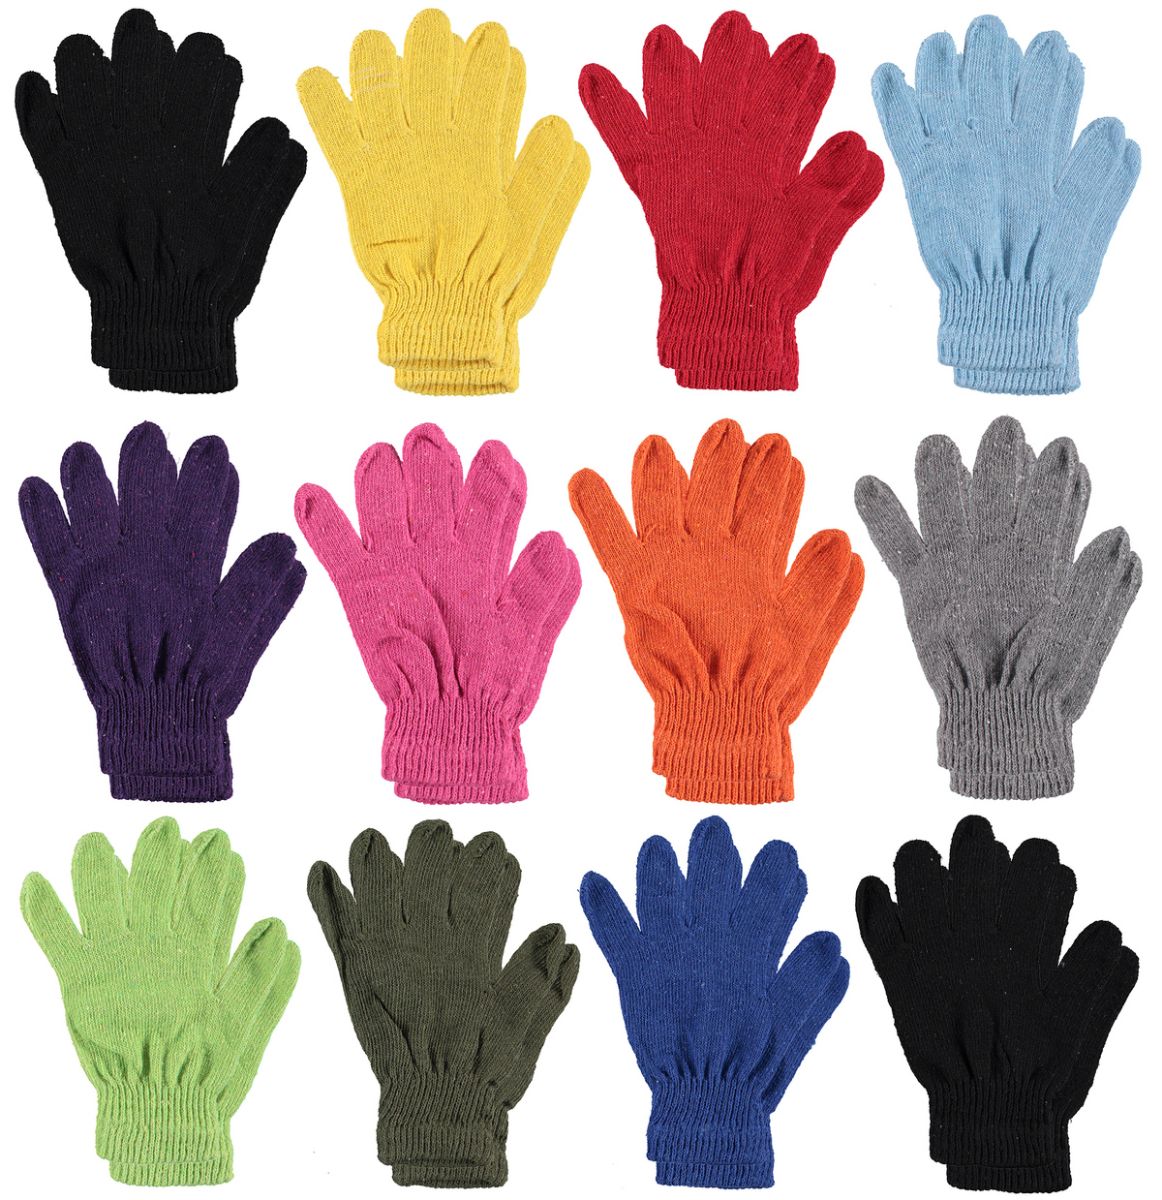 60 Pairs Yacht & Smith Kids Warm Winter Colorful Magic Stretch Gloves Ages 2-8 Bulk Pack - Kids Winter Gloves